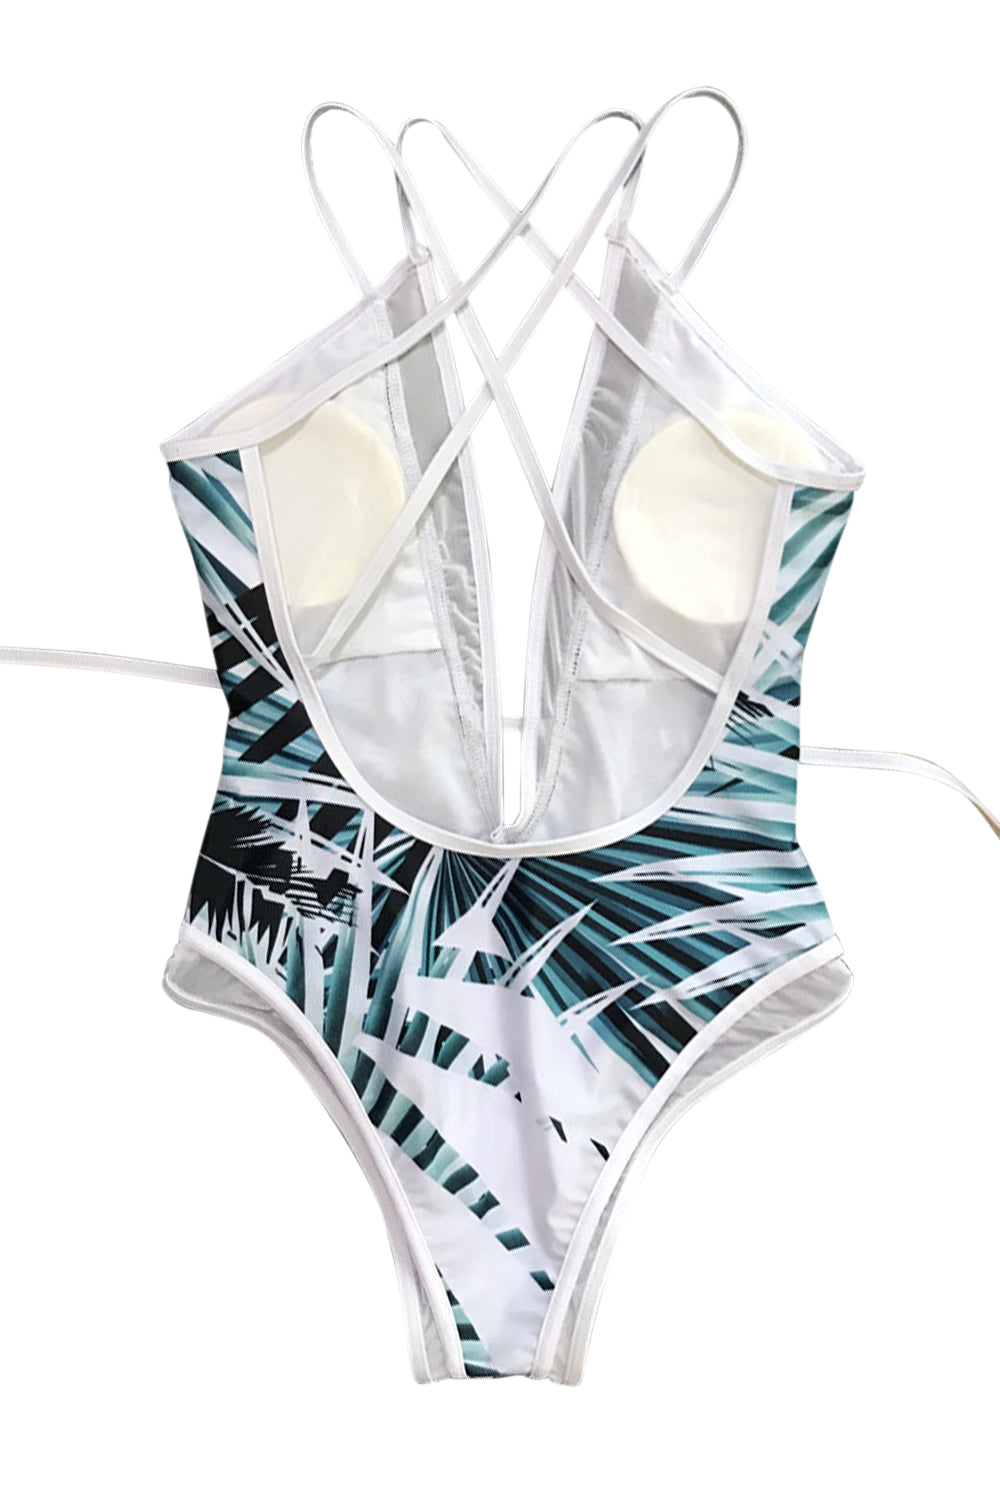 Iyasson Tropical Palm Leaves Printing Deep V-neckline One-piece Swimsuit